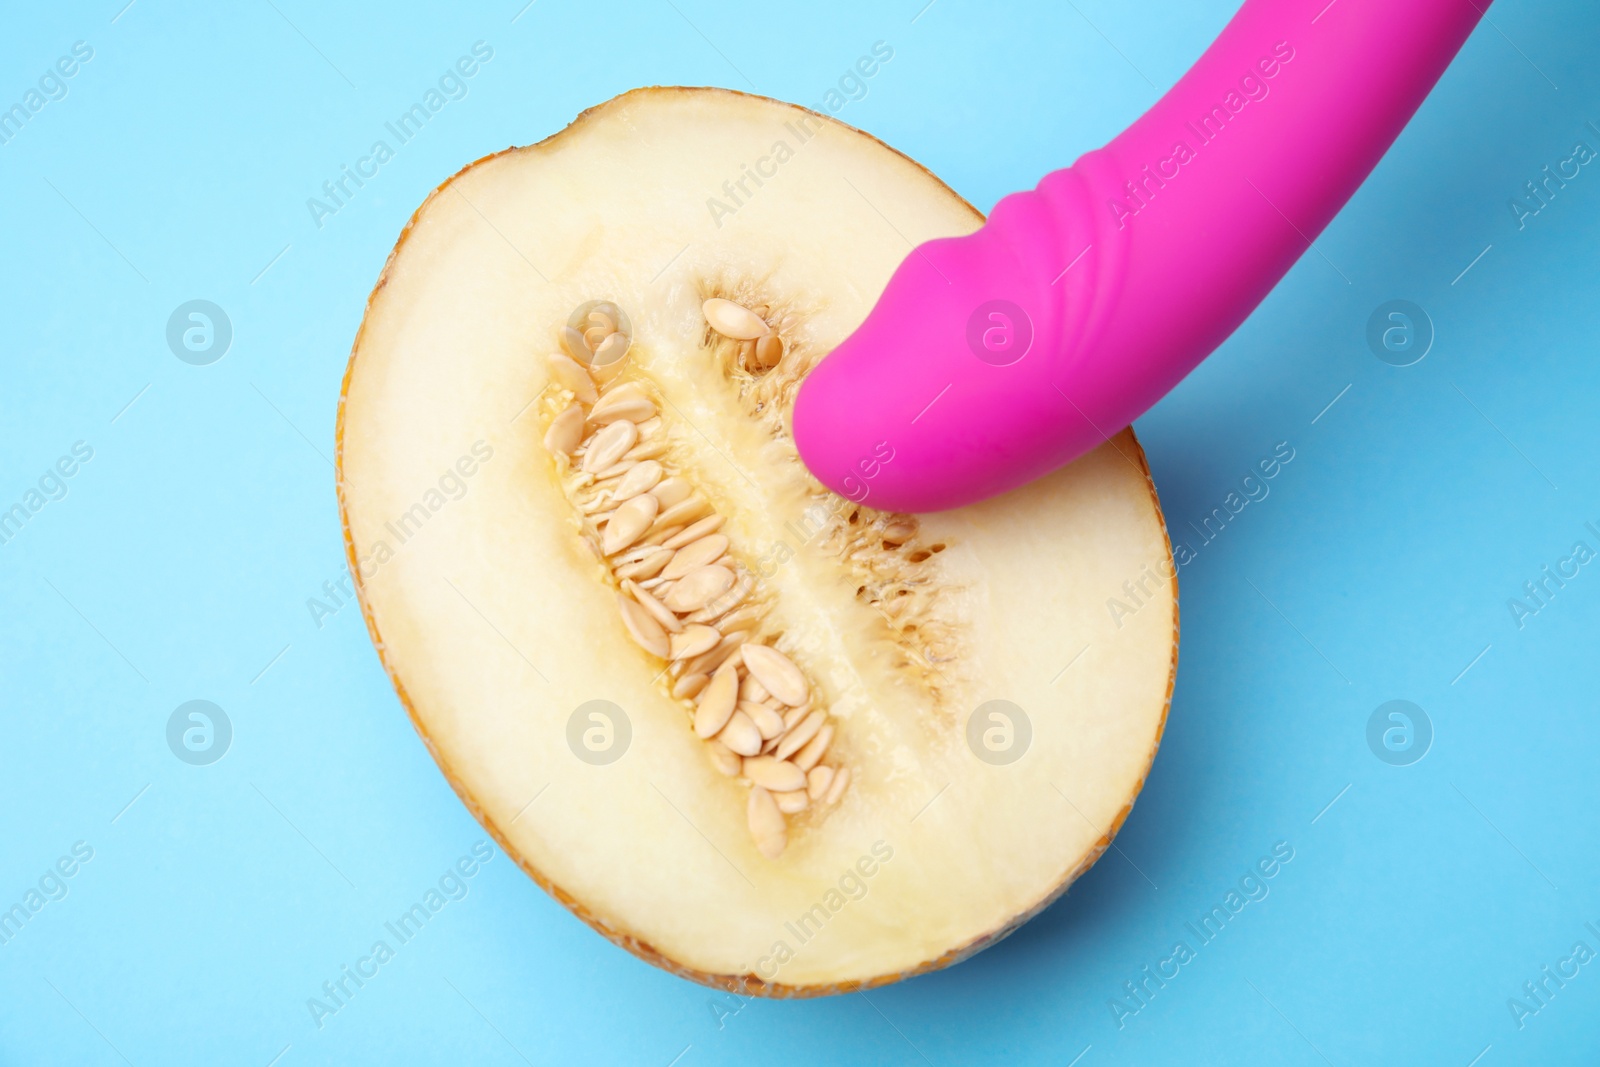 Photo of Half of melon and purple vibrator on blue background, flat lay. Sex concept